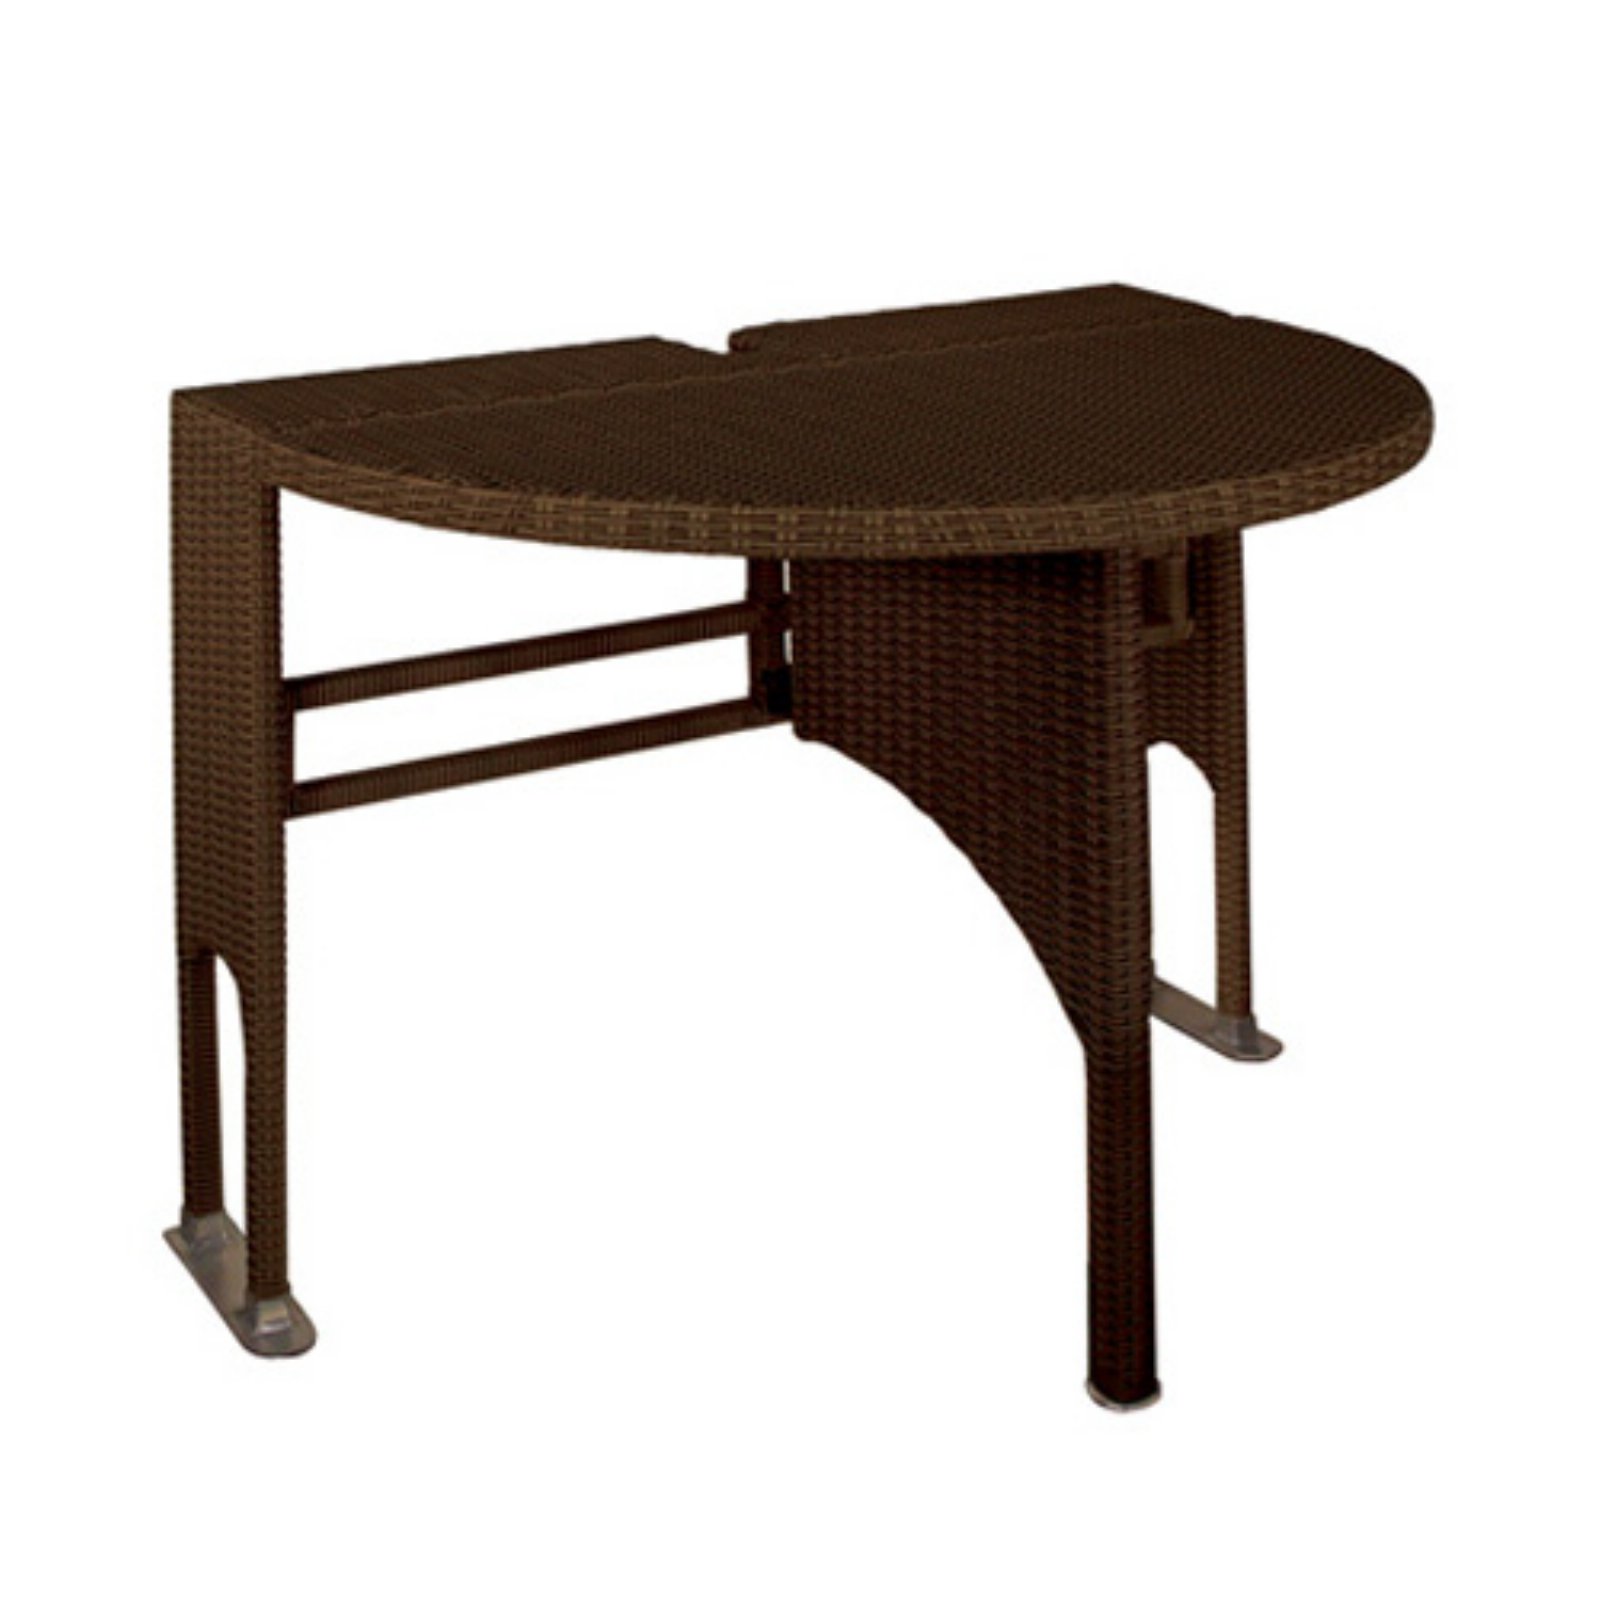 Blue Star Group Terrace Mates Adena All-Weather Wicker Java Color Table Set w/ 7.5'-Wide OFF-THE-WALL BRELLA - Natural Olefin Canopy - image 3 of 9